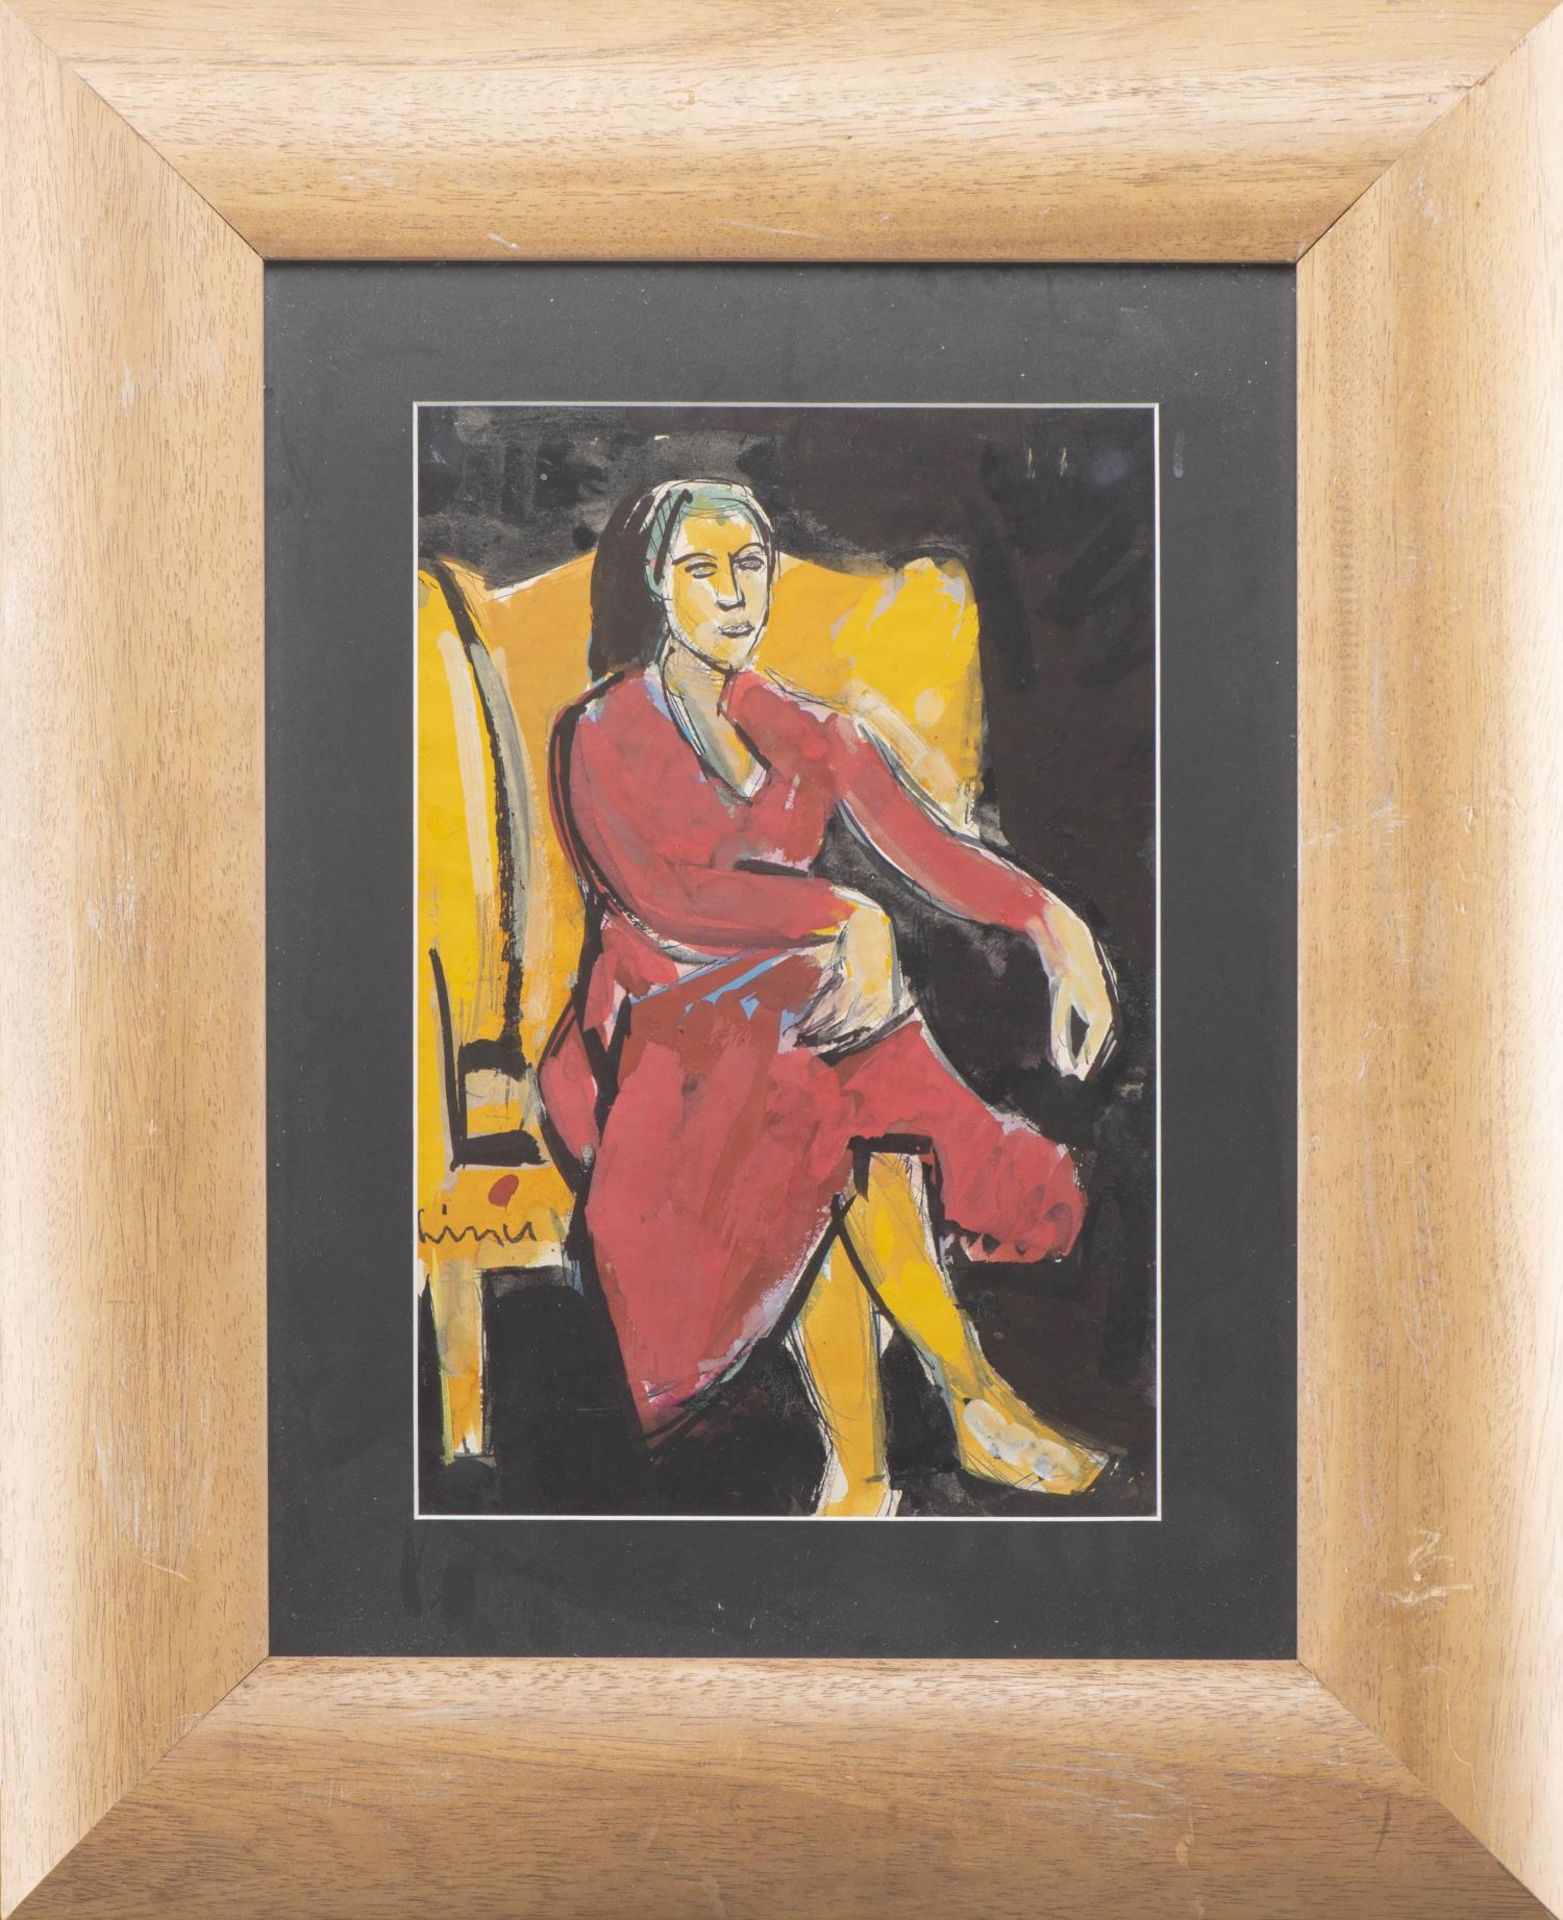 Carl LINER (1914-1997) "Fauteuil jaune", 1951 - Image 5 of 16